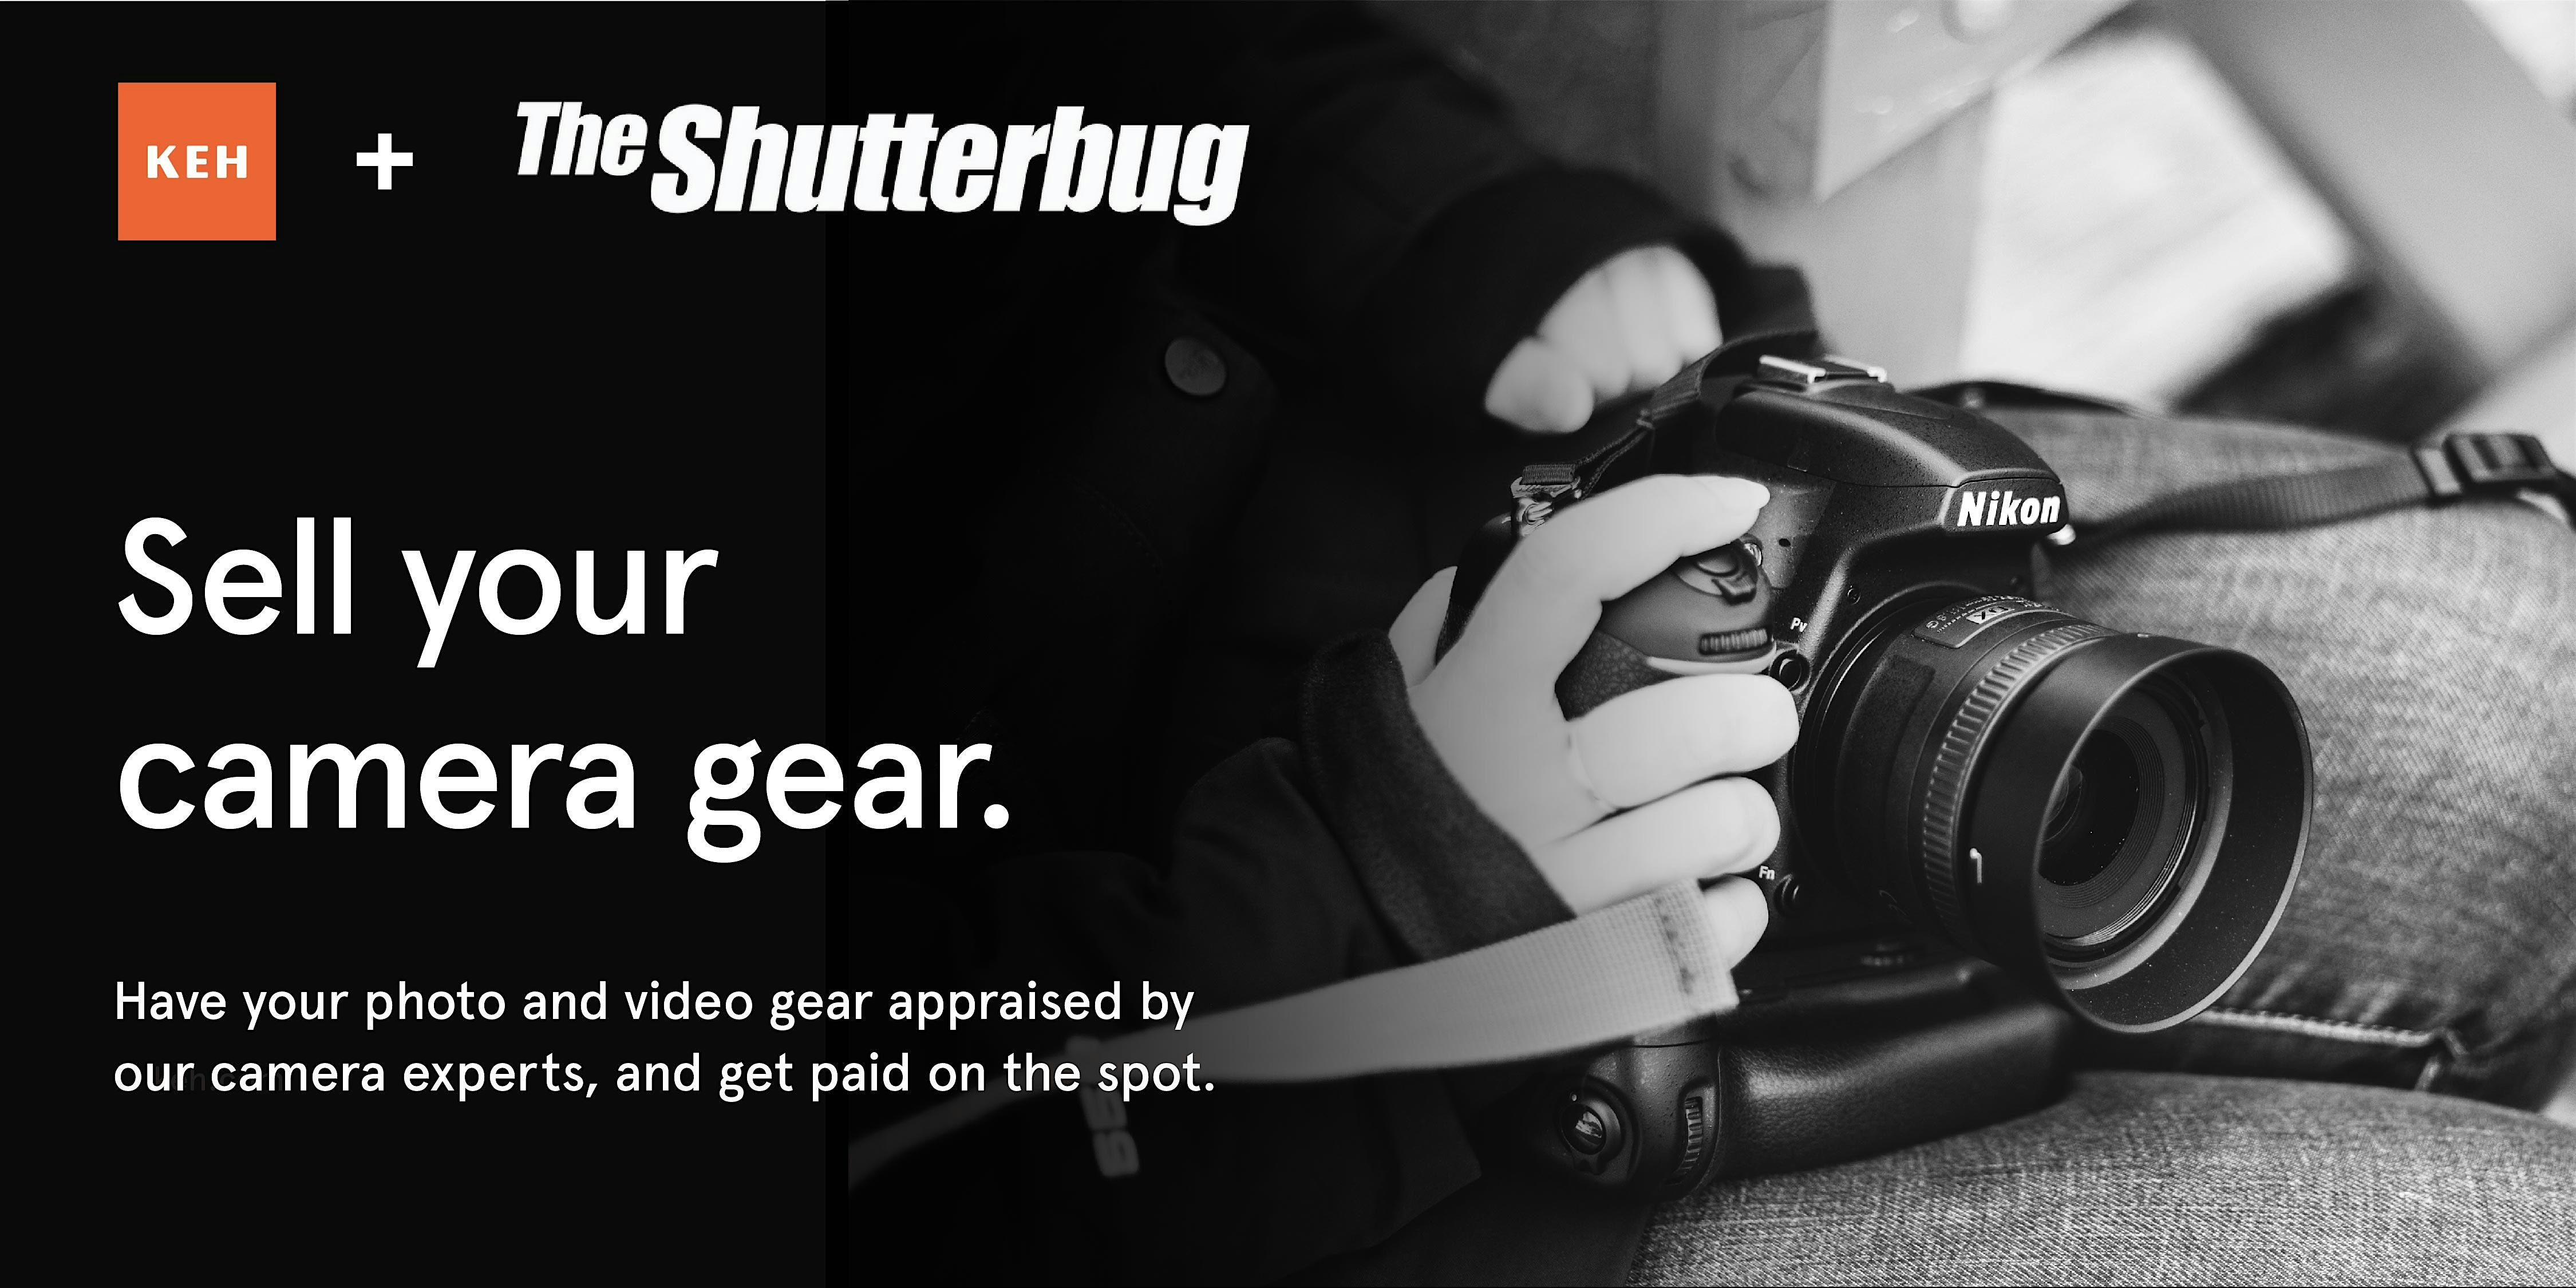 Sell your camera gear (free event) at The Shutterbug